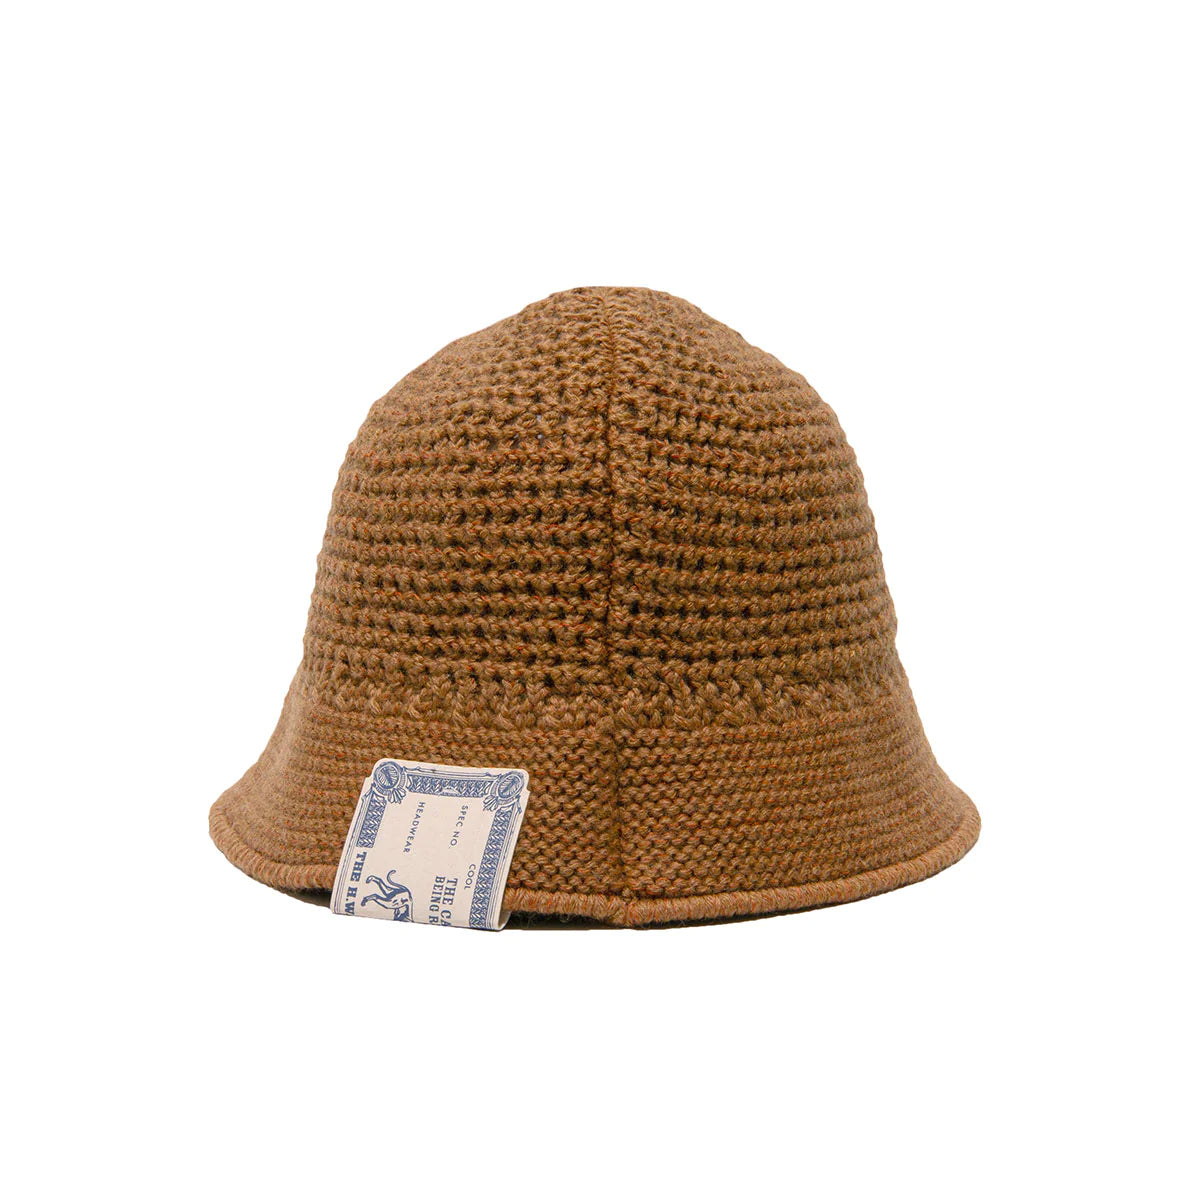 The H.W. Dog & Co - WOOL KNIT HAT - Gold